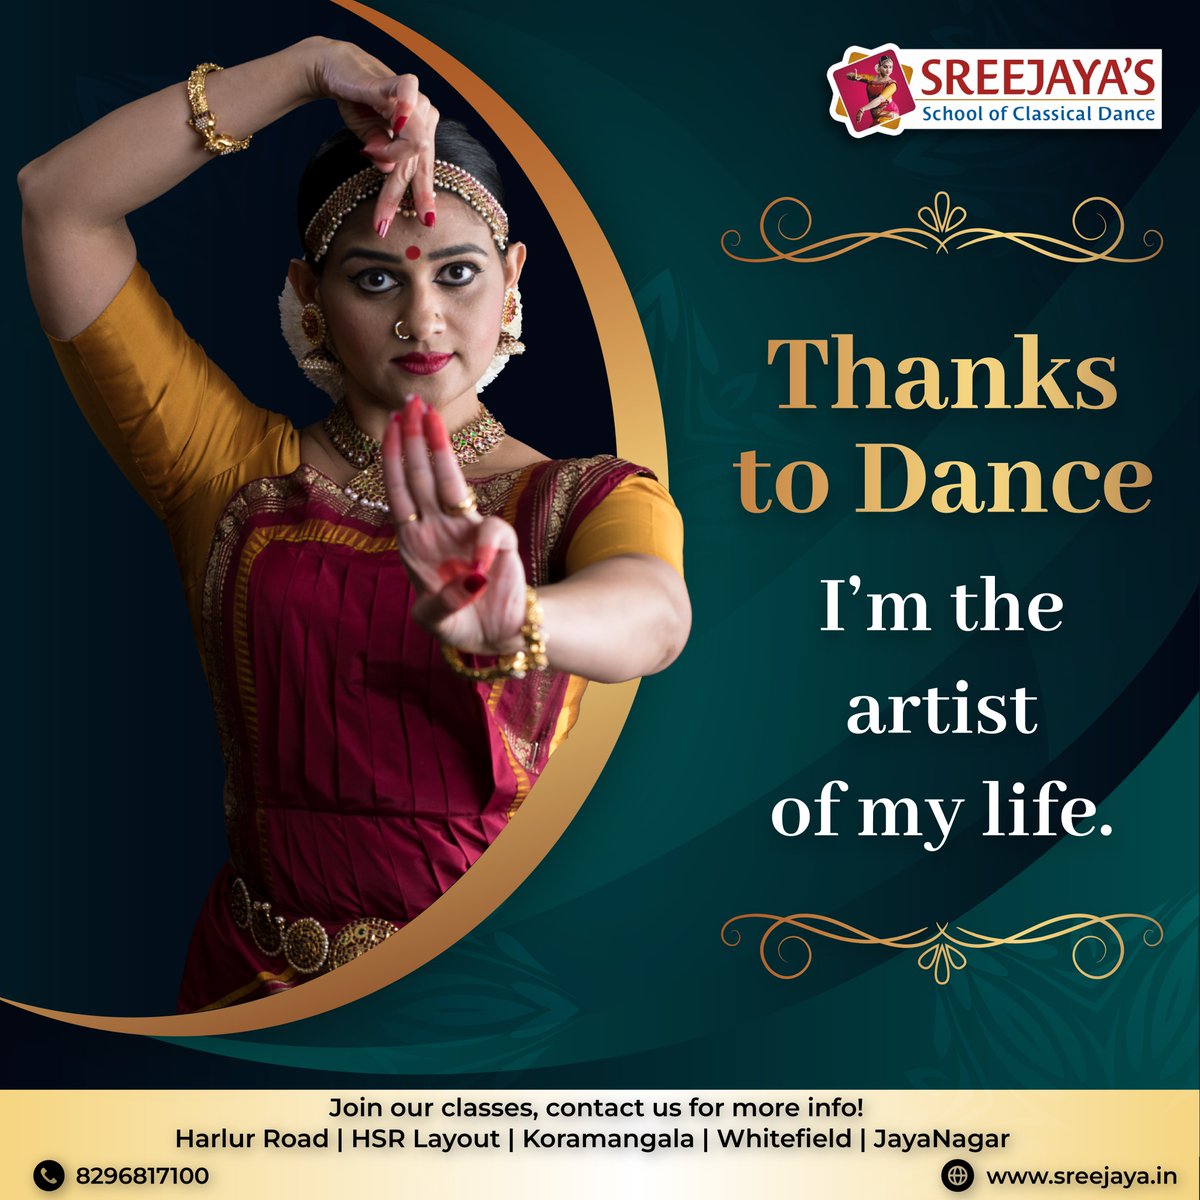 Thanks to Dance, I'm the artist of my life!!
Learn #Bharatanatyam from #SSCD 
#dancelove #dancequote #thankstodance #Indianclassical #DanceAcademy
 #bharatnatyamdance #DanceTime #DanceClass #DanceStudio  #Dance #Dancer #bharatnatyamlove #bharatnatyamdiaries #dancelife #Quotes